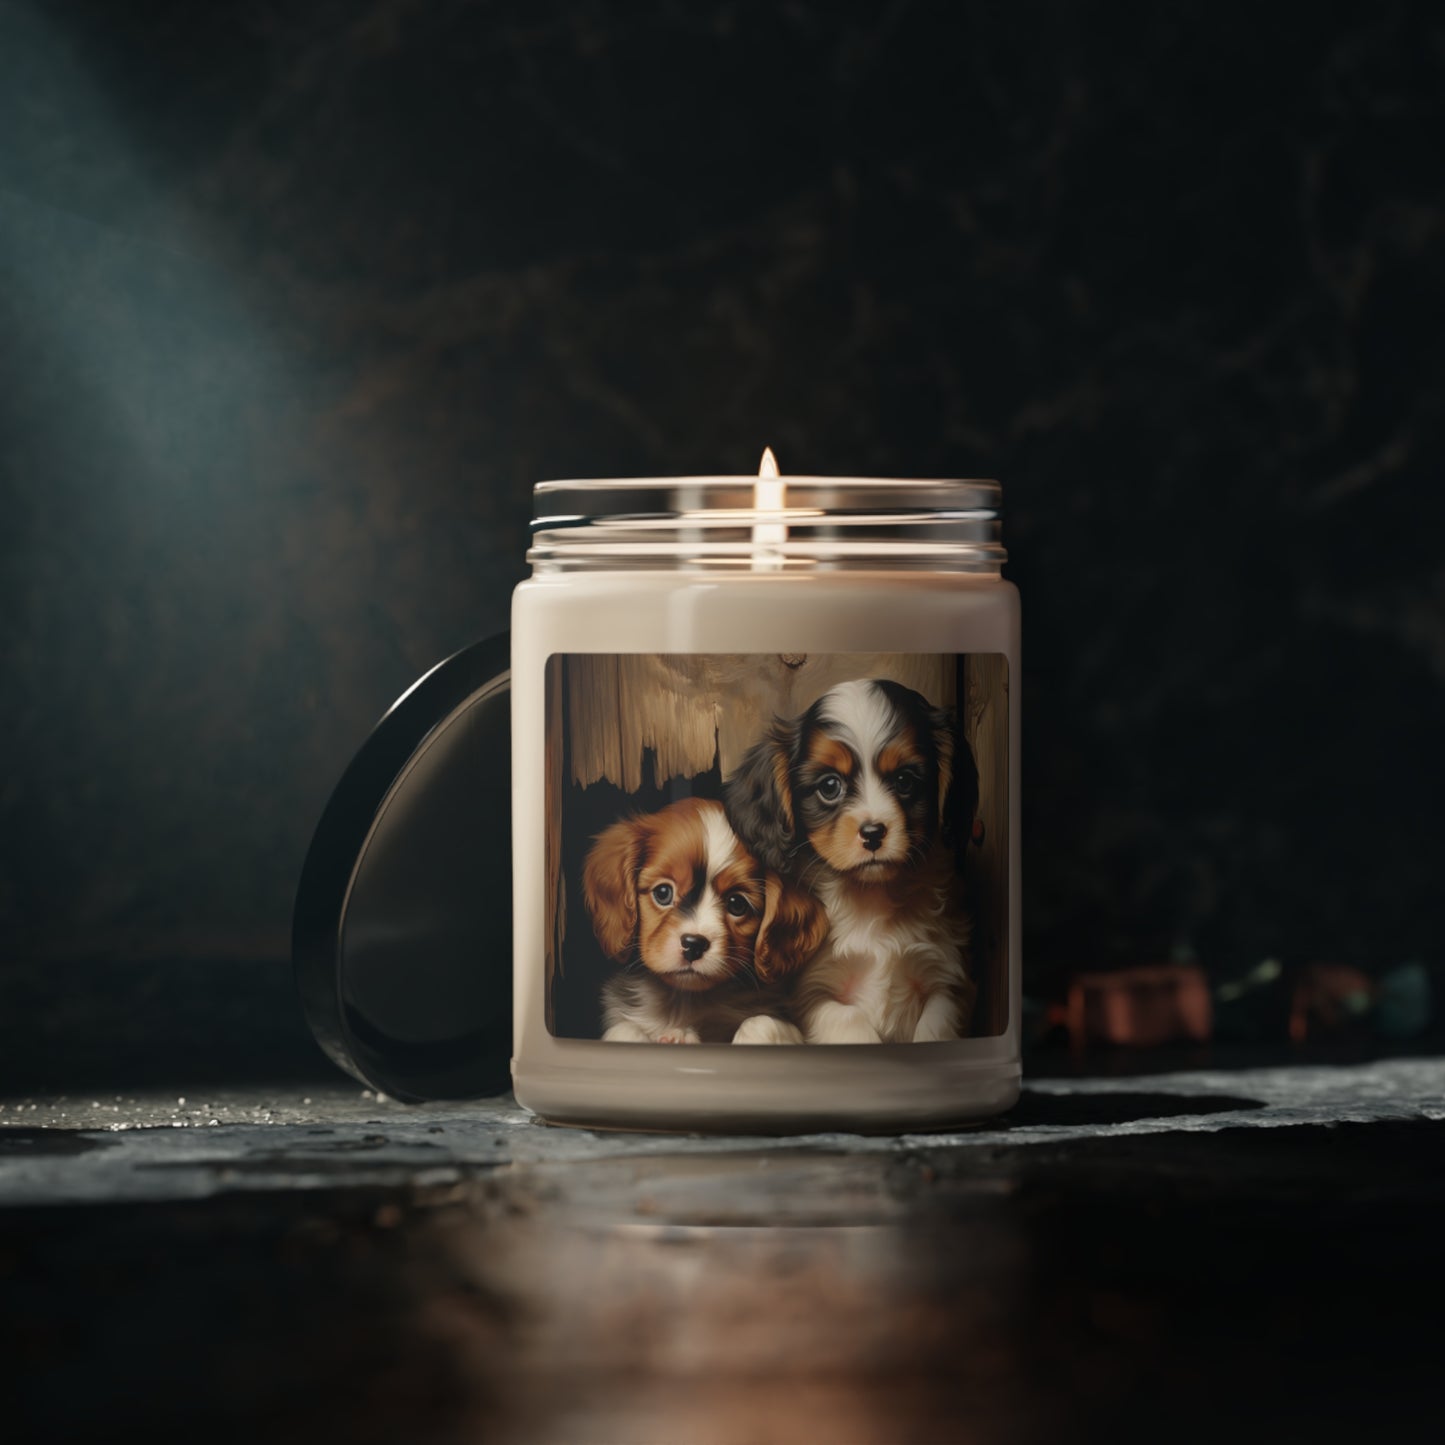 Puppies Scented Soy Candle, 9oz